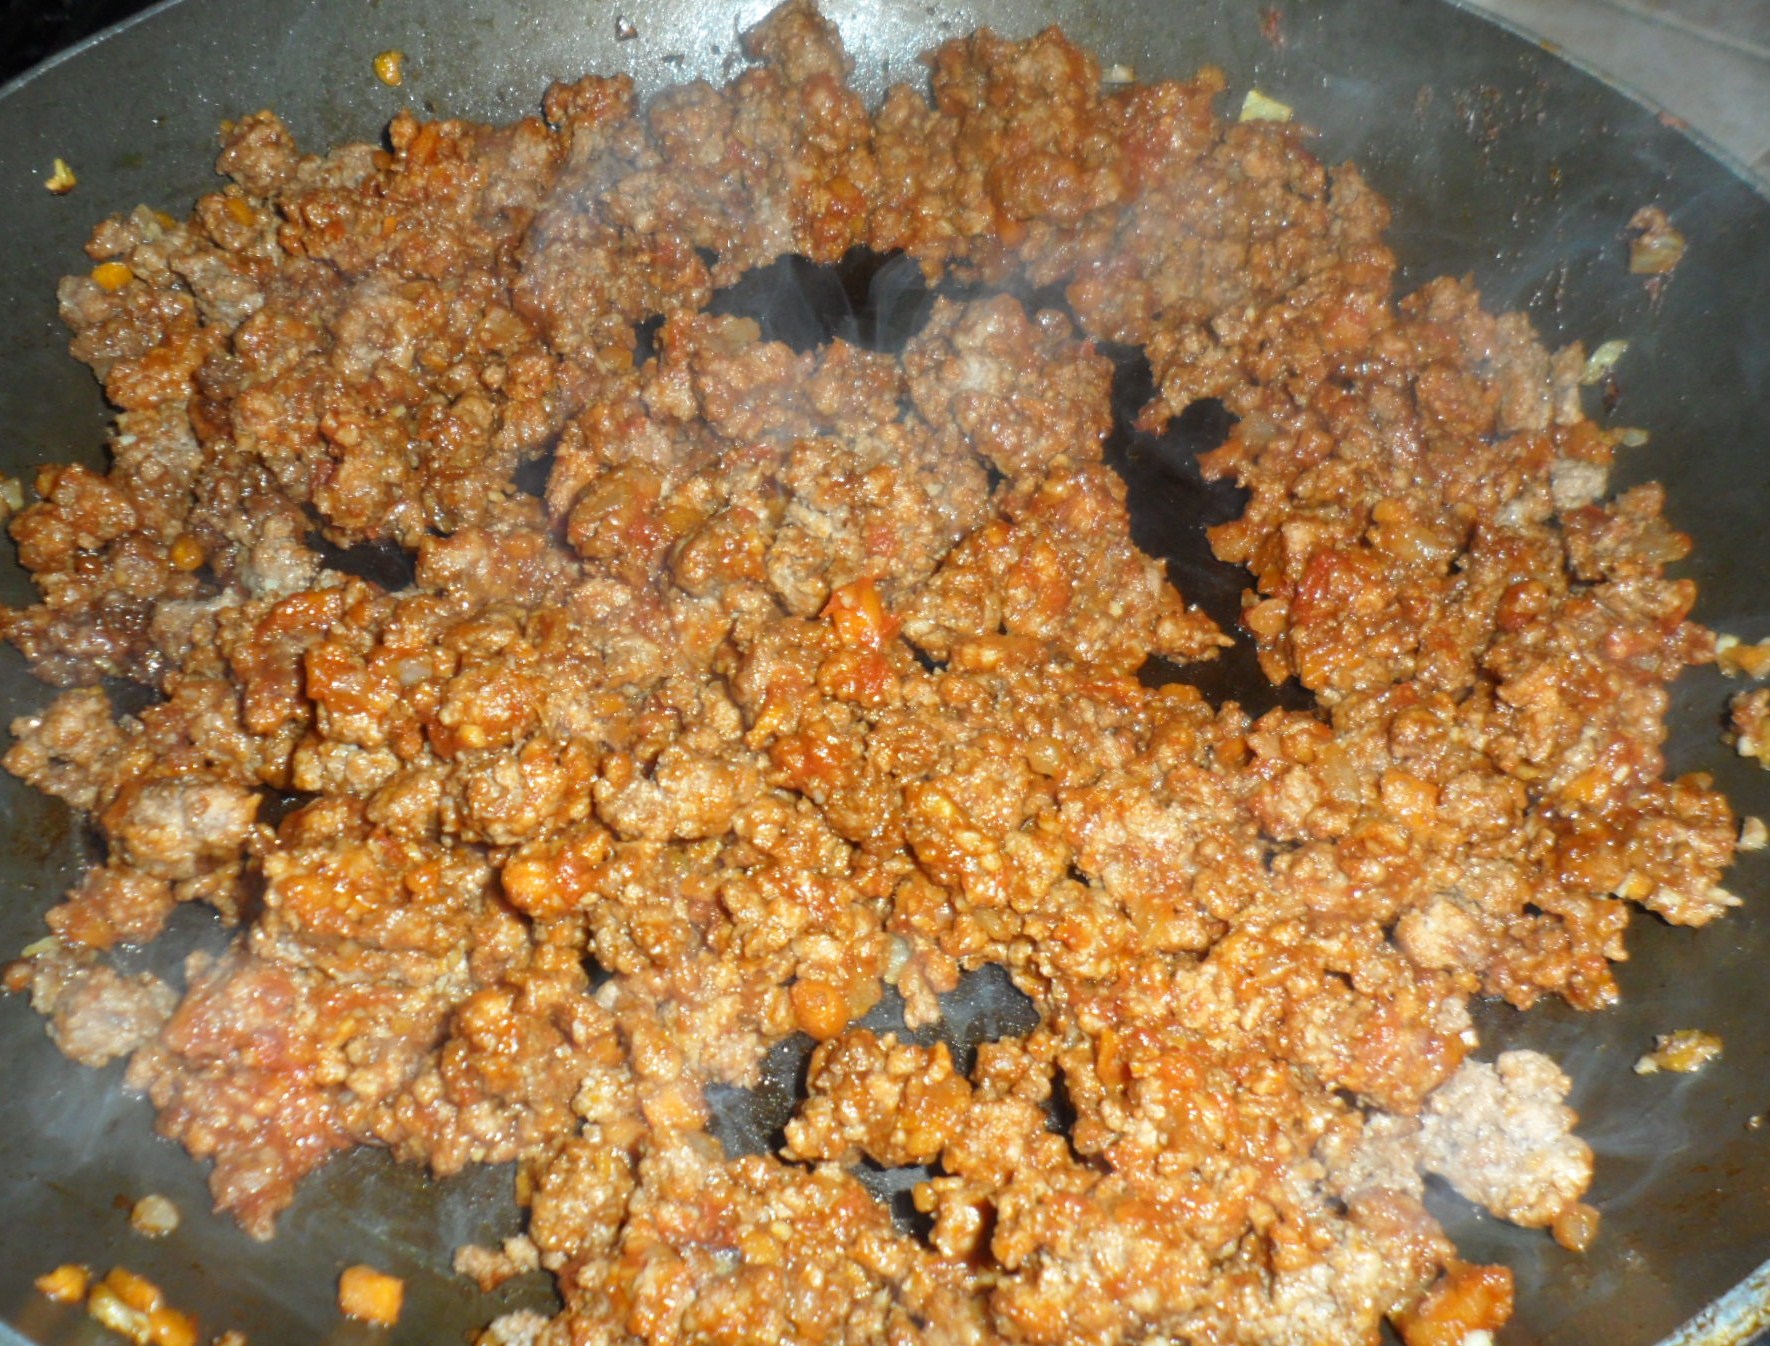 After your meat has cooked you add in some Worcestershire sauce, brown sugar, tomato paste, and chili powder.